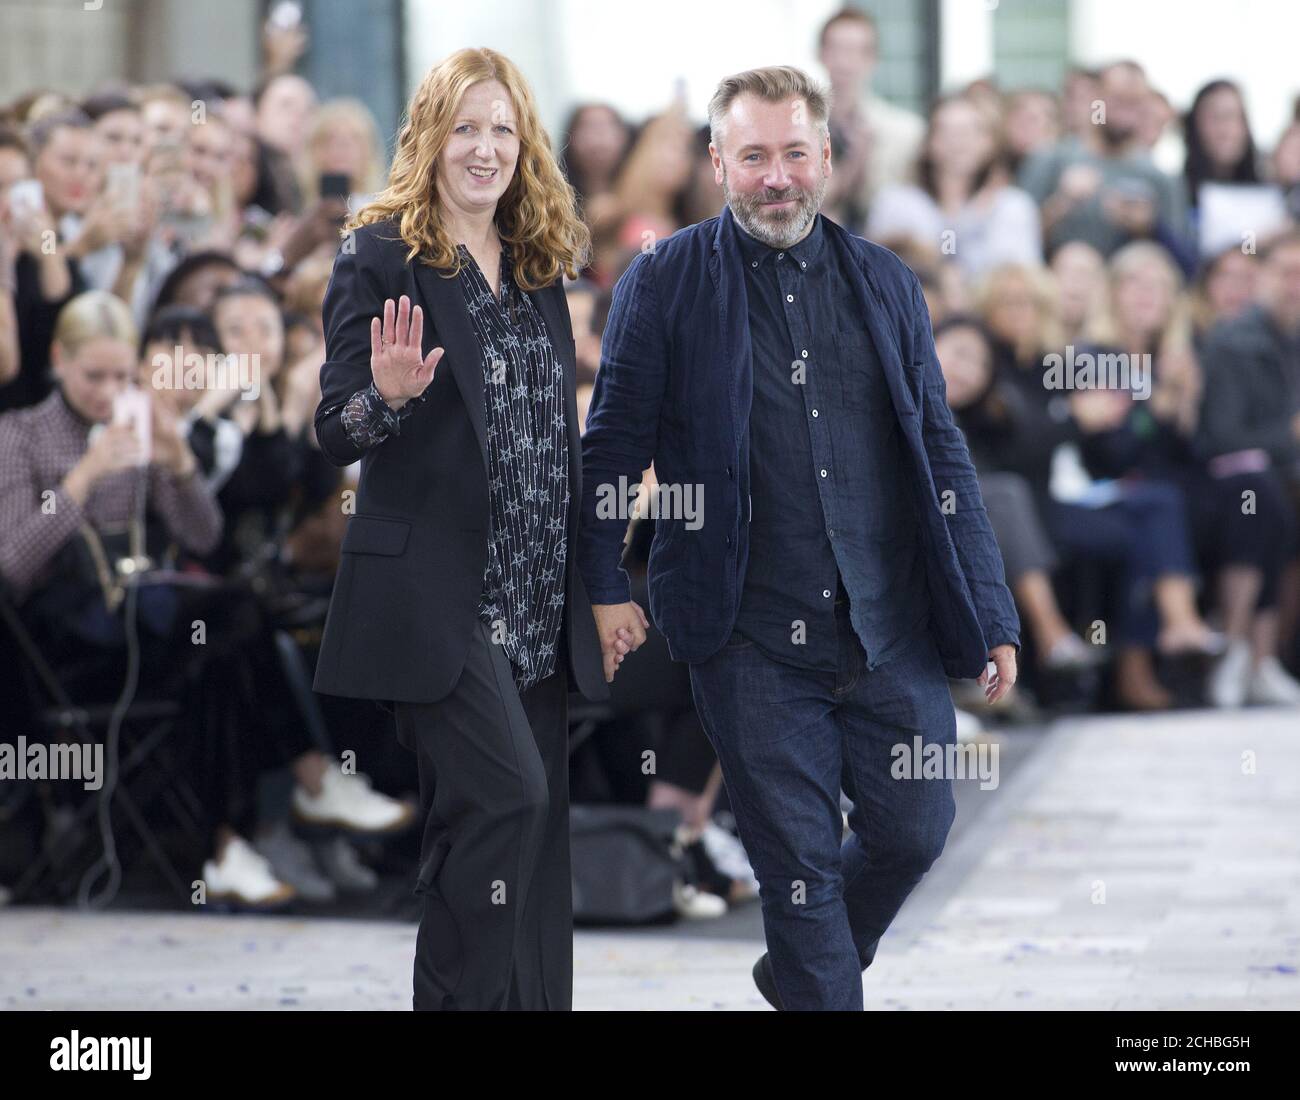 Designers Justin Thornton (R) and Thea Bregazzi greet the public after presenting Preen by Thornton Bregazzi Spring/ Summer 2017 London Fashion Week show at Queen Elizabeth II Centre, London. PRESS ASSOCIATION Photo. Picture date: Sunday September 18, 2016. See PA story CONSUMER Fashion. Photo credit should read: Isabel Infantes /PA Wire Stock Photo